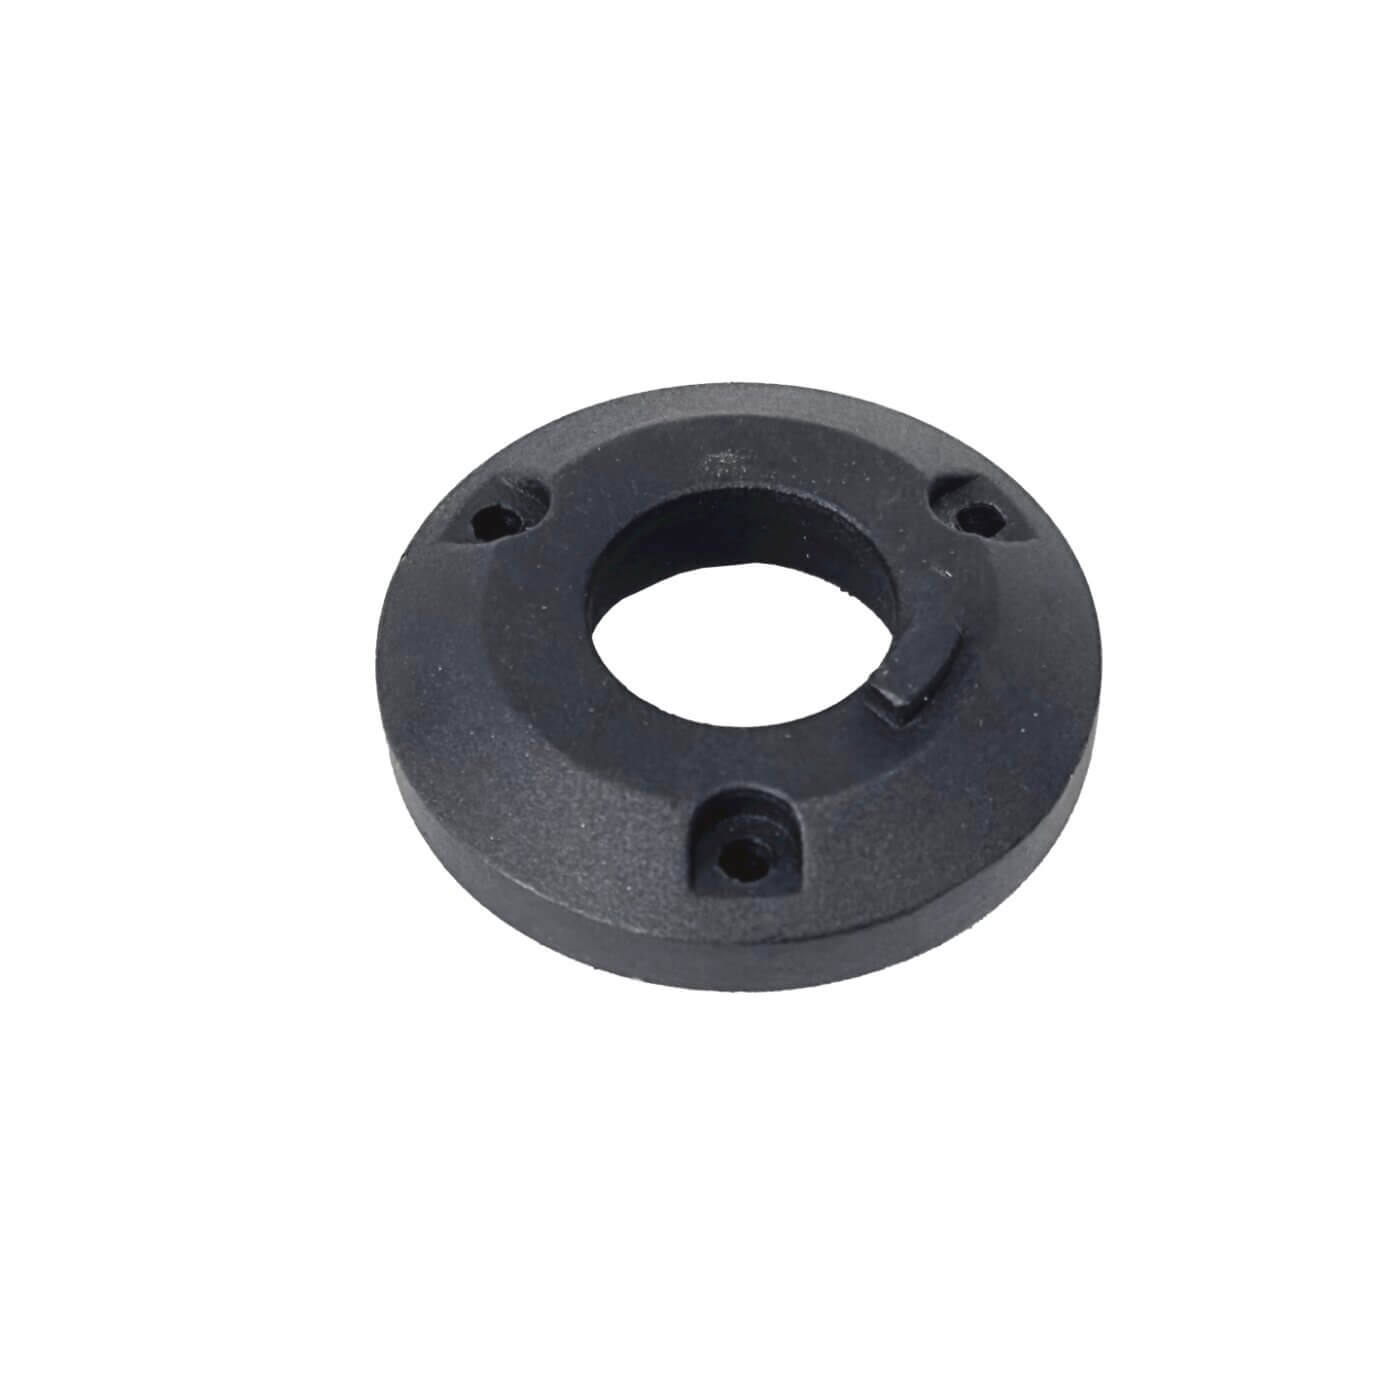 A black plastic ring with auto-draft holes.